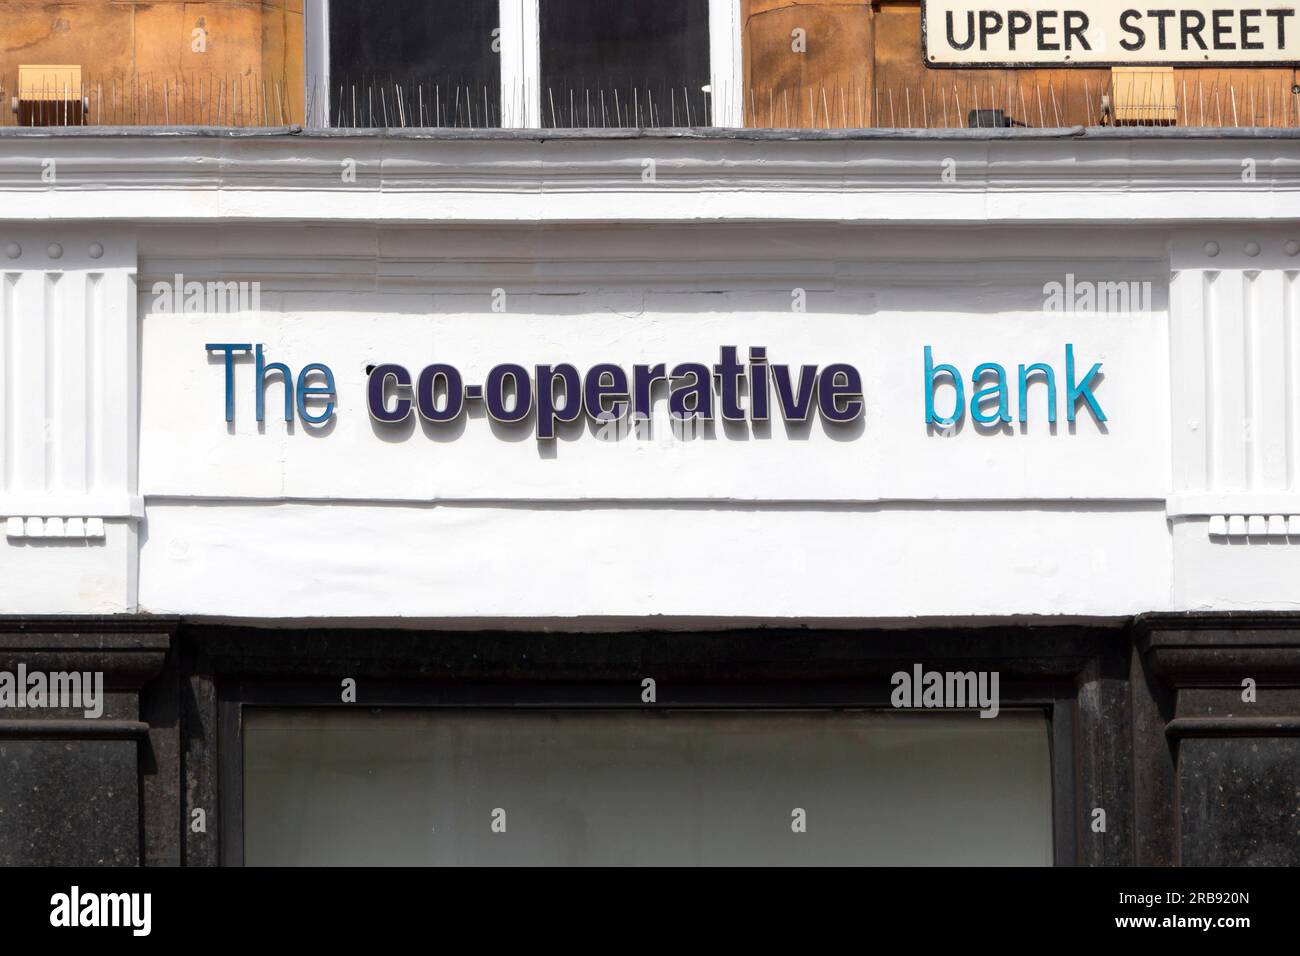 sign for the co-op co-operative bank in upper street islington Stock Photo